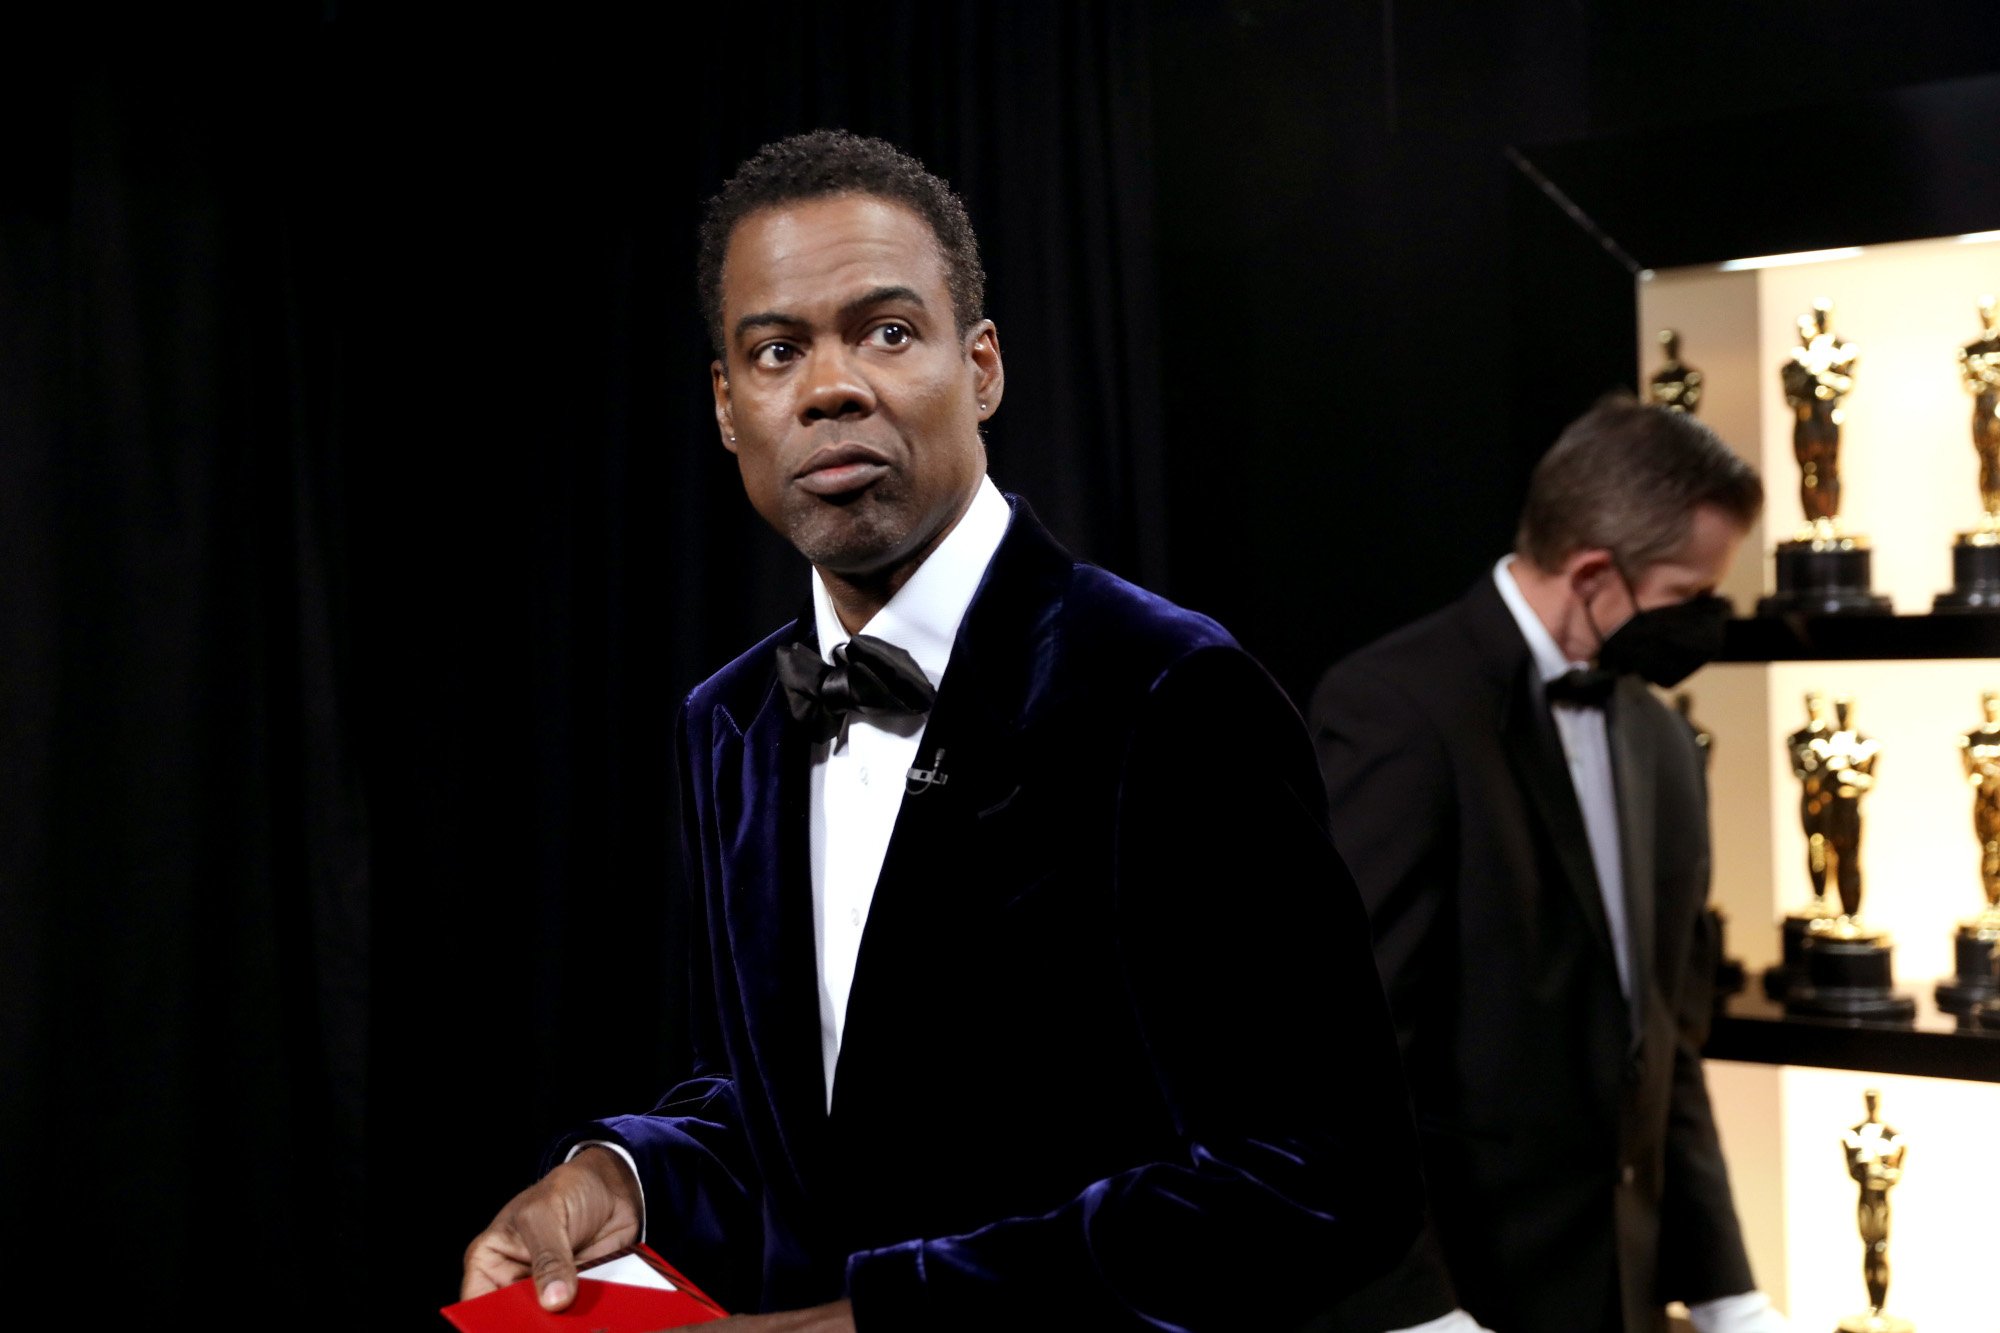 Comedian Chris Rock at the 2022 Oscars. He's wearing a suit, holding a card, and standing backstage.